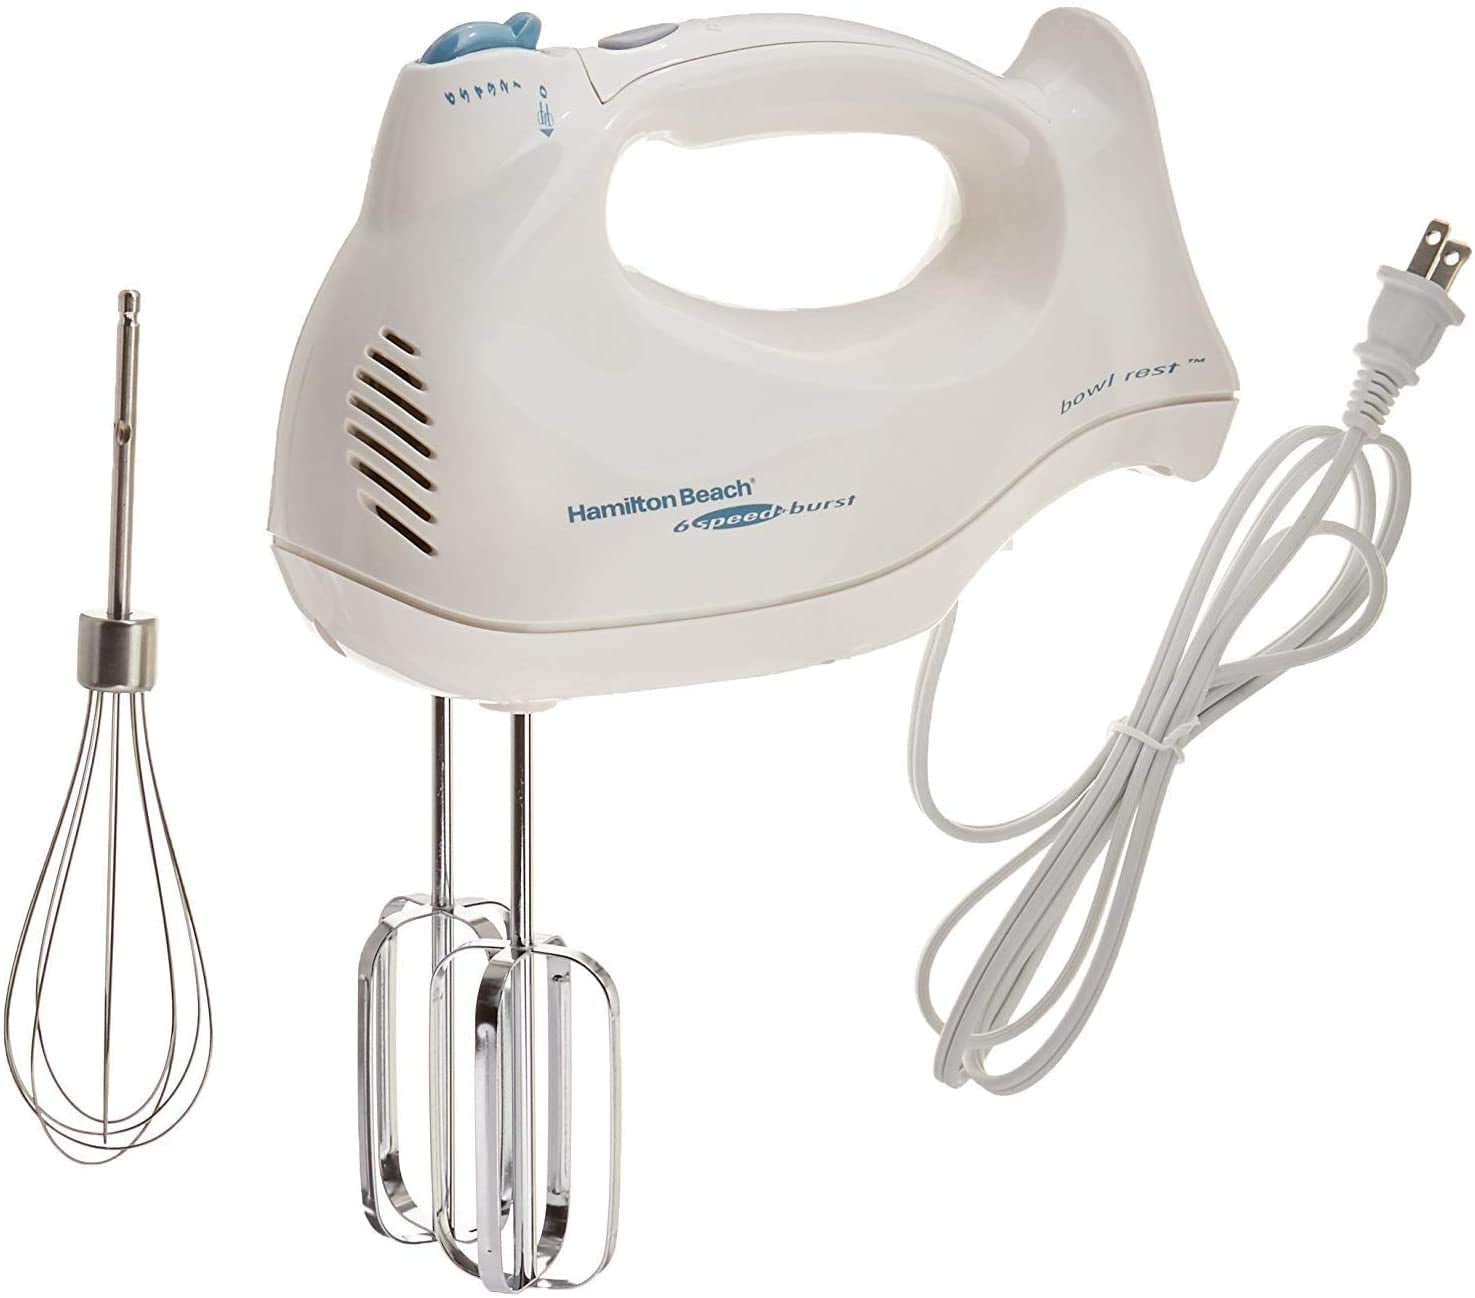 Shardor Hand Mixer Electric Whisk, Anti-Splash Hand Whisk, 6 Speeds with Turbo Button, Snap-On Storage Case, Easy Eject Button, 5 Stainless Steel